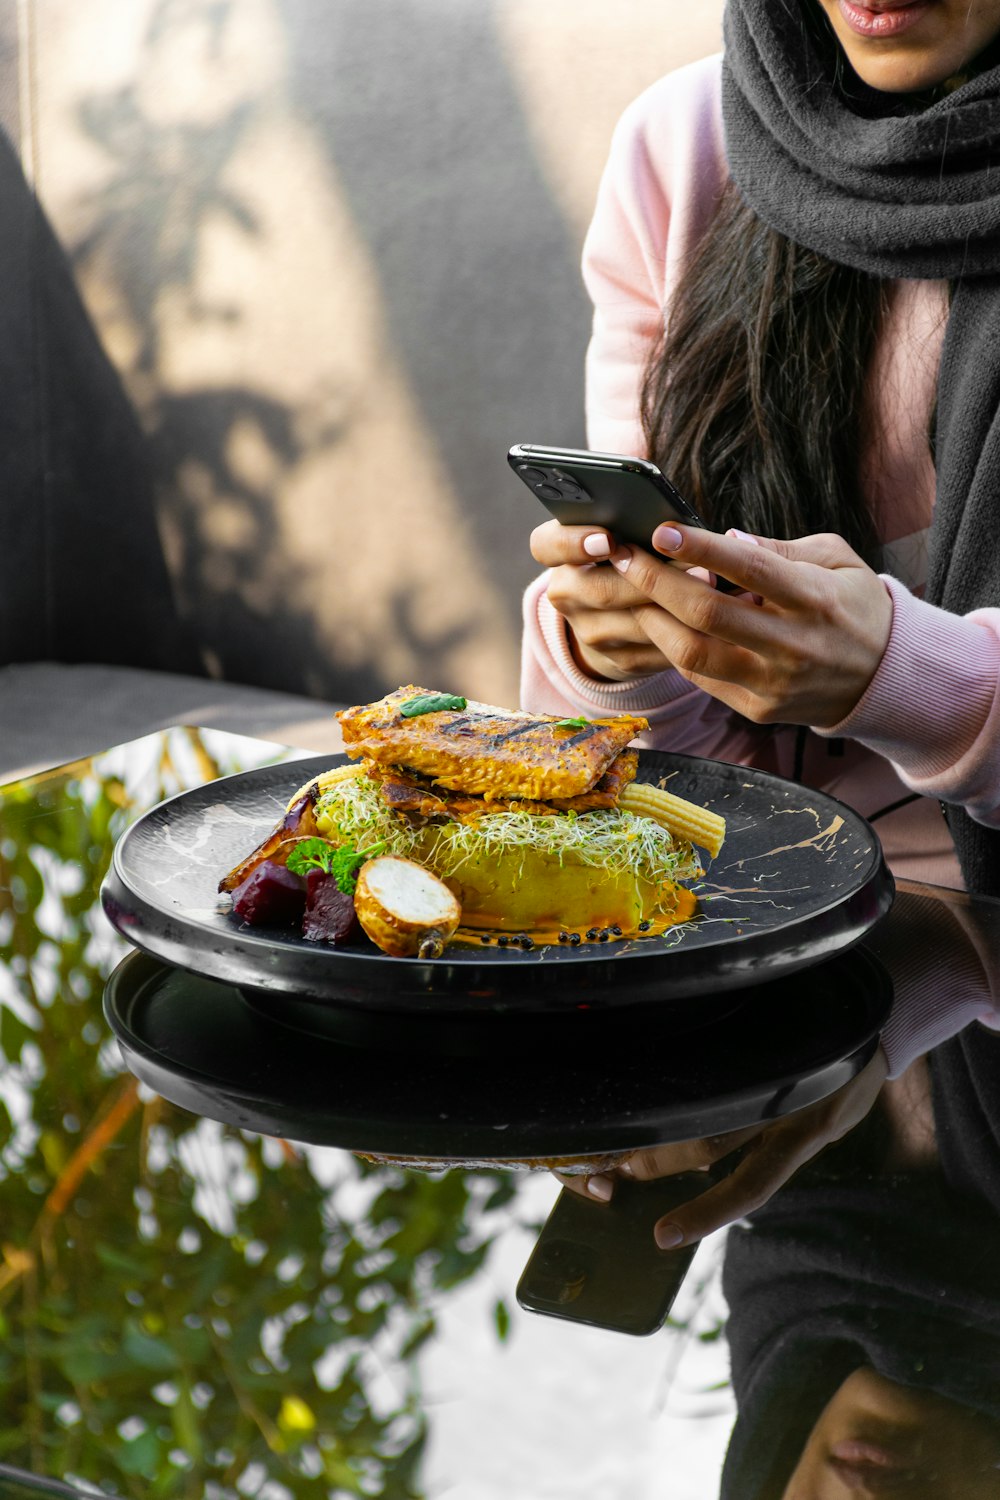 woman holding black smartphone while eating